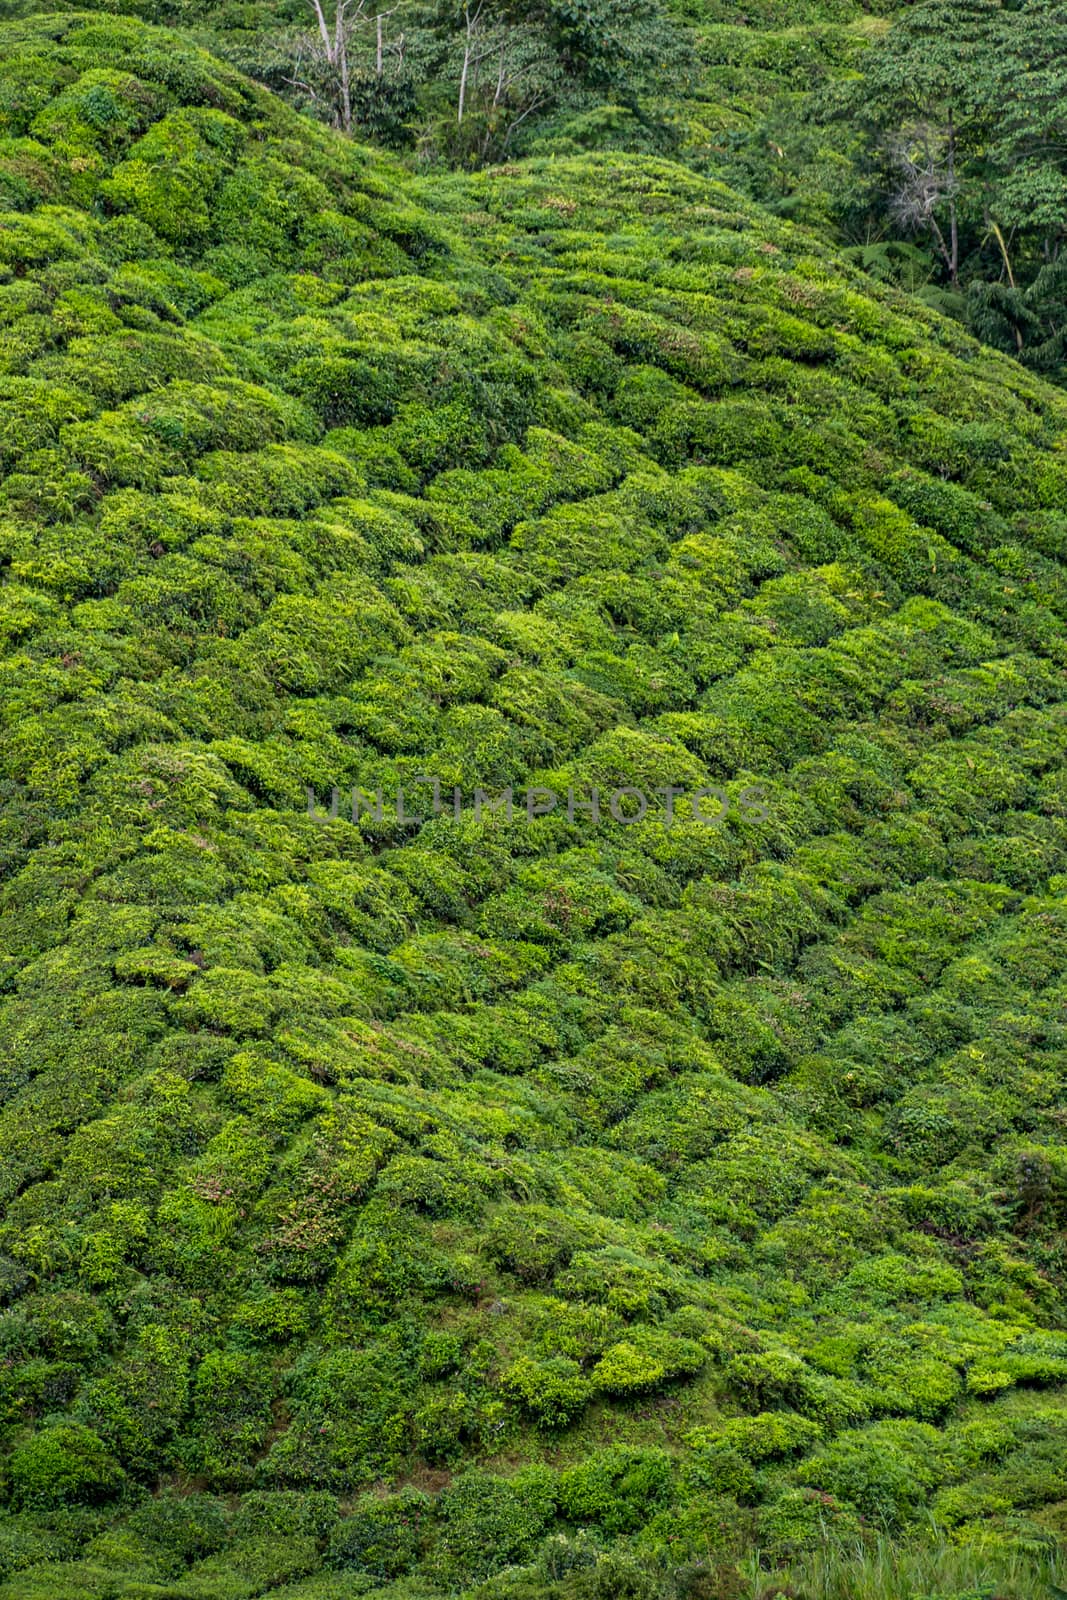 Tea plants covering steep mountain slopes in Malaysia